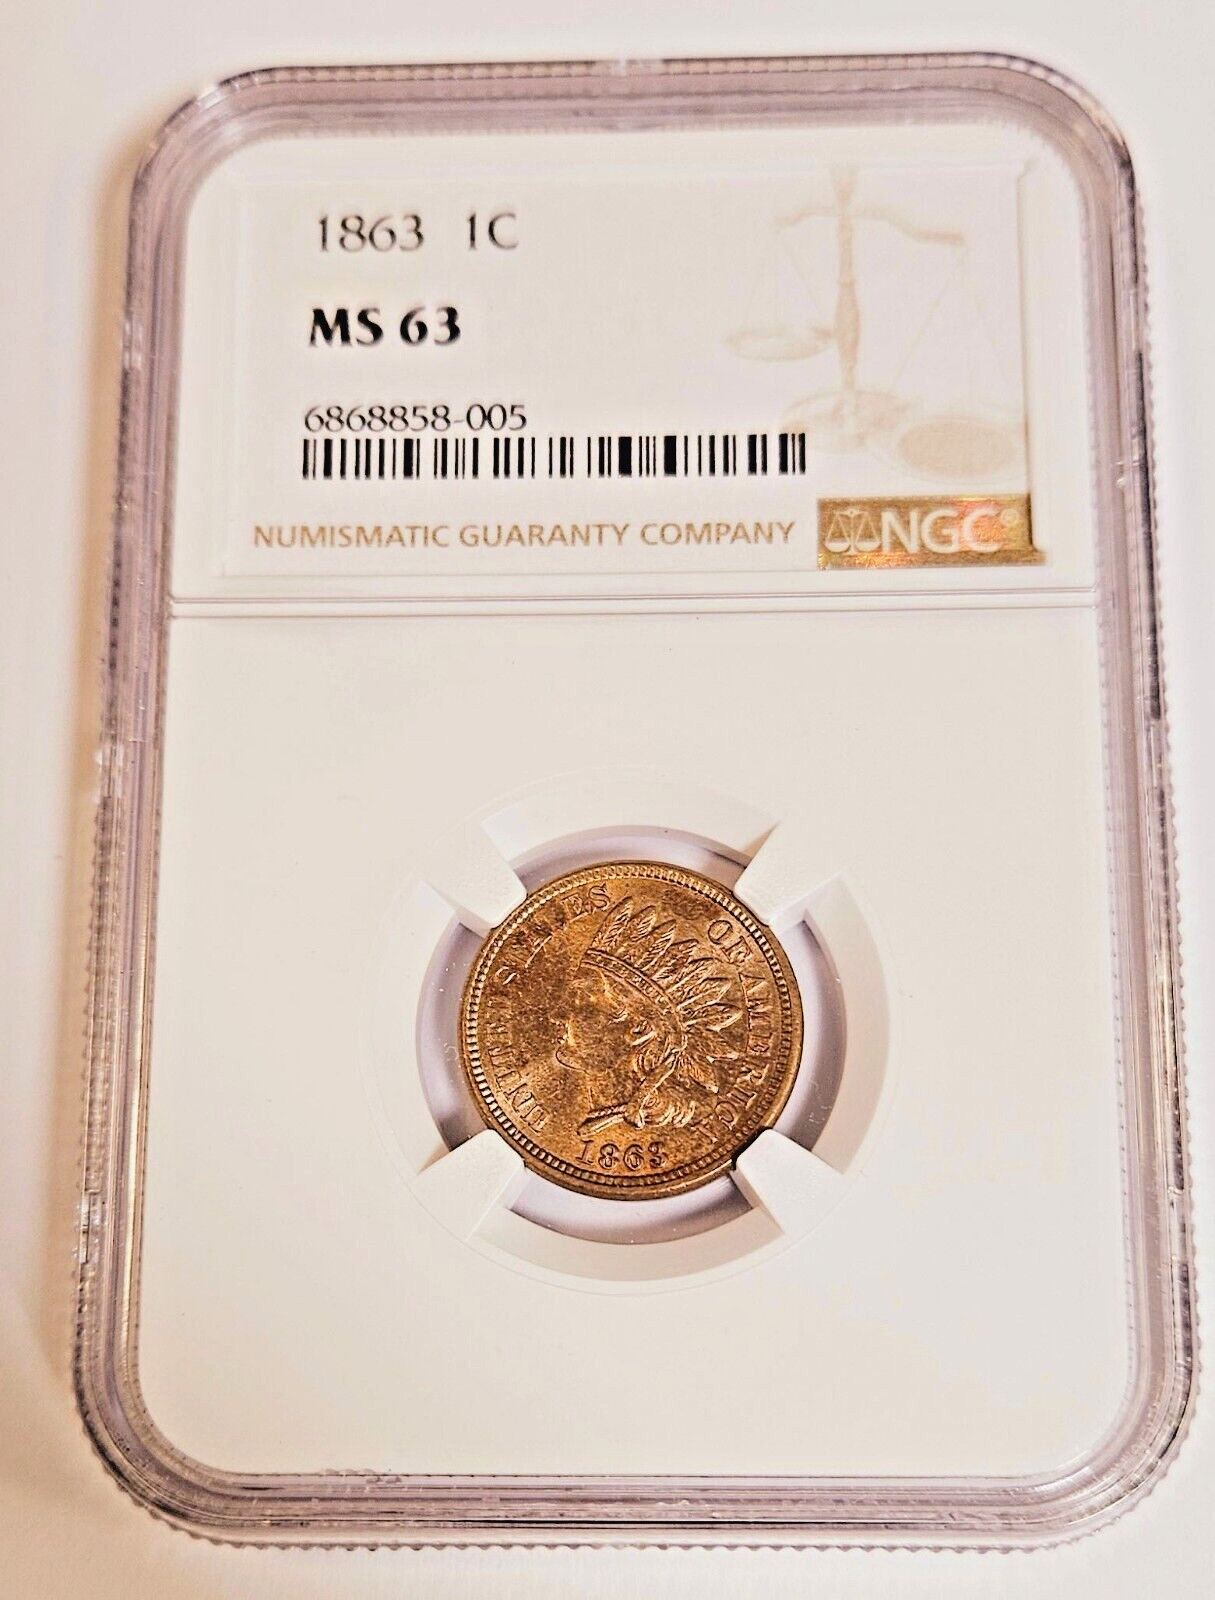 1863 1C Indian Head Cent - NGC MS 63